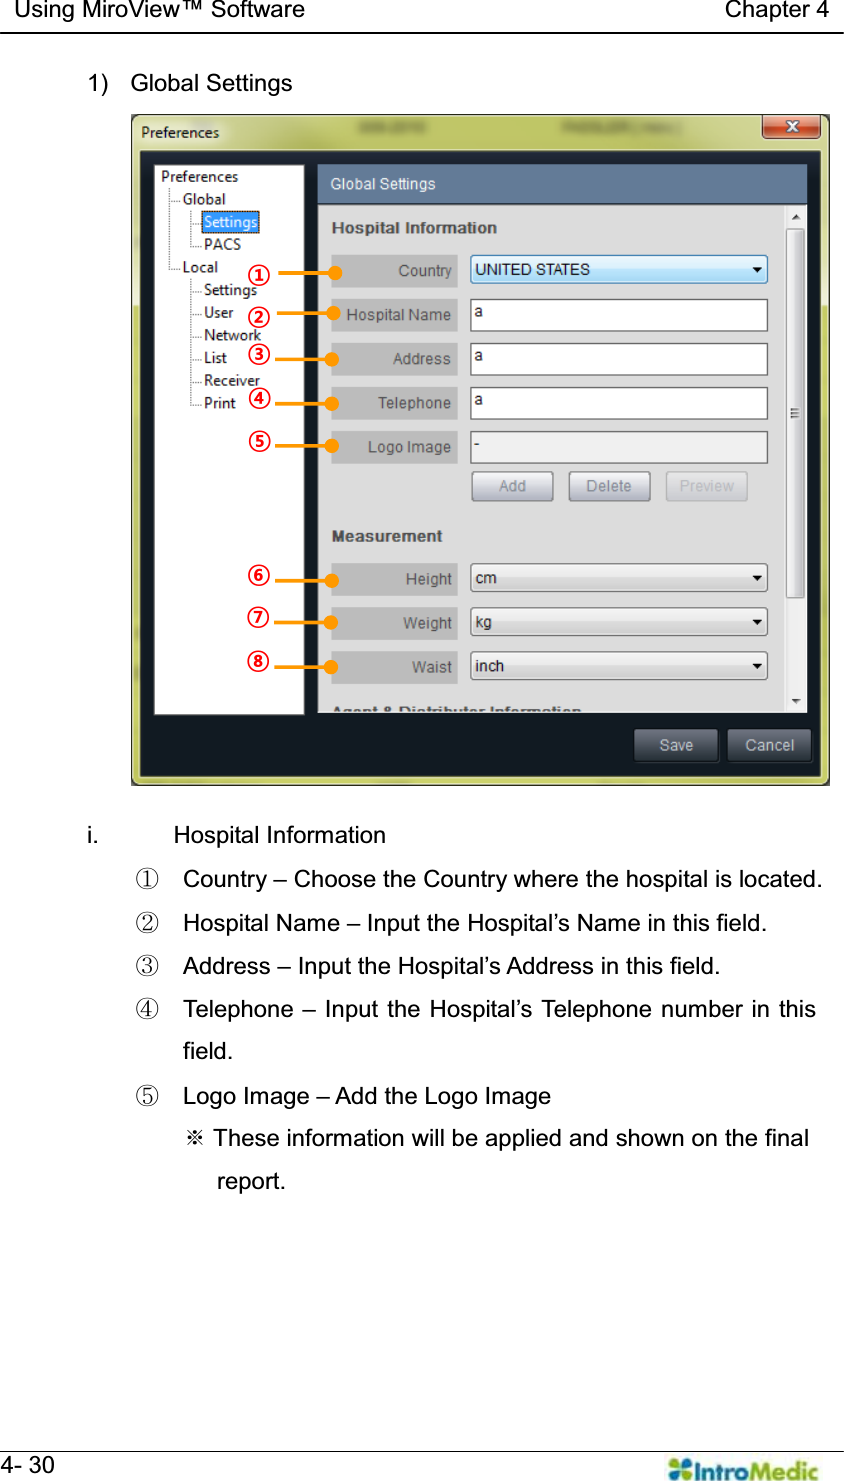   Using MiroView Software                                   Chapter 4   4- 30 1) Global Settings  i. Hospital Information ཛ Country ± Choose the Country where the hospital is located. ཛྷ Hospital Name ± ,QSXWWKH+RVSLWDO¶V1DPHLQWKLVILHOG ཝ Address ± ,QSXWWKH+RVSLWDO¶V$GGUHVVLQWKLVILHOG ཞ Telephone ± ,QSXWWKH+RVSLWDO¶V7HOHSKRQHQXPEHULQWKLVfield. ཟ Logo Image ± Add the Logo Image ୔ These information will be applied and shown on the final      report. § ¨ © ¢ £ ¤ ¥ ¦ 